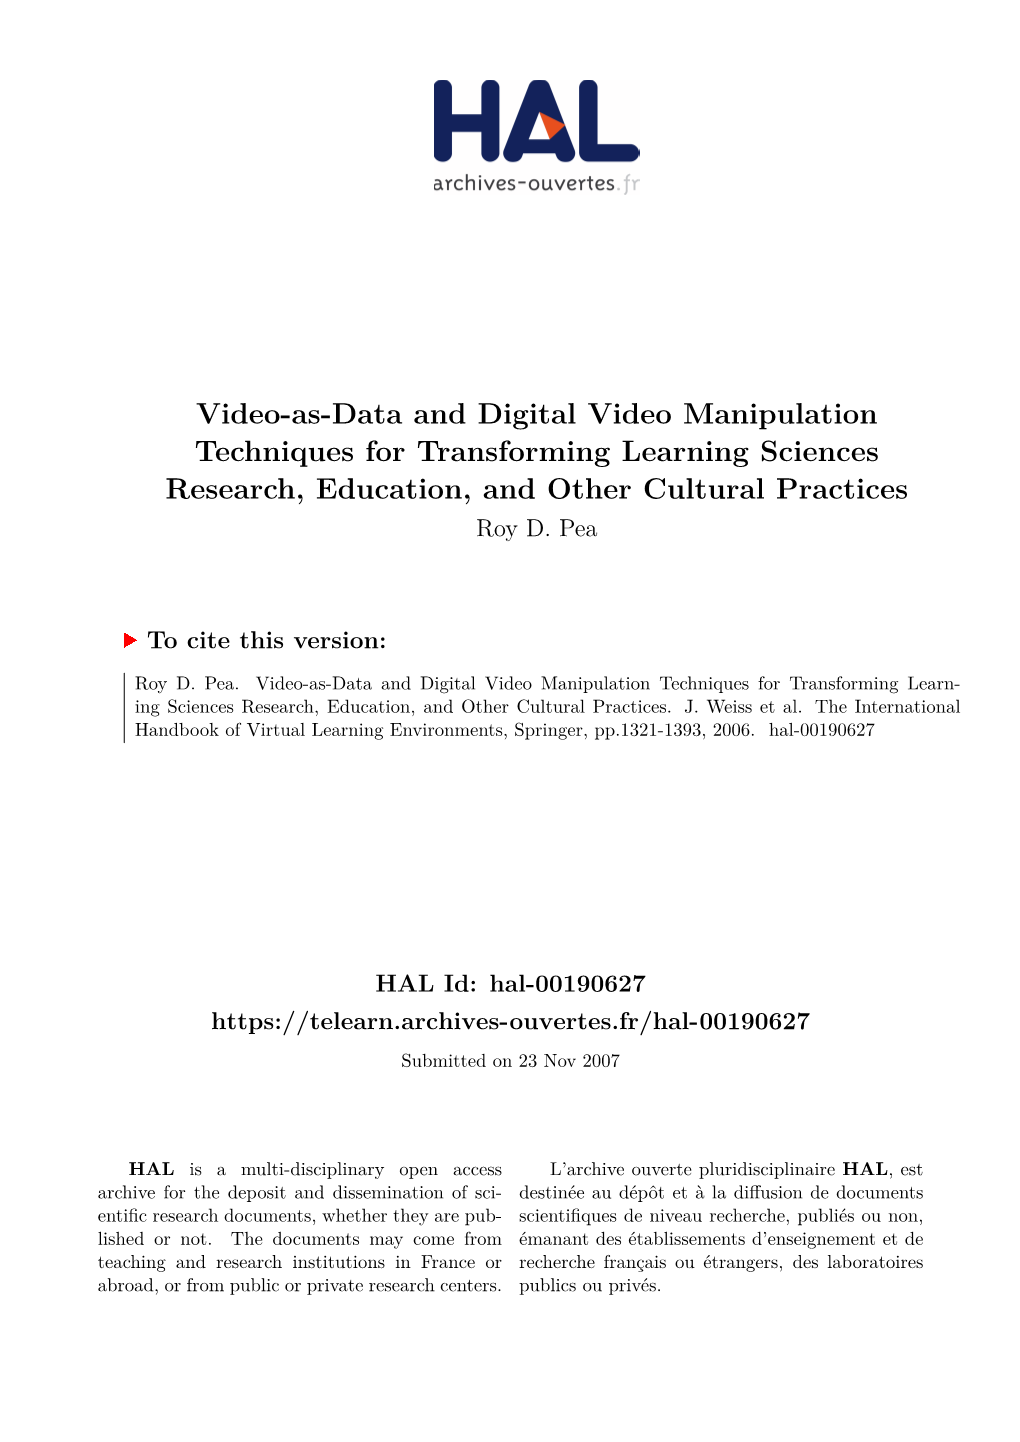 Video-As-Data and Digital Video Manipulation Techniques for Transforming Learning Sciences Research, Education, and Other Cultural Practices Roy D